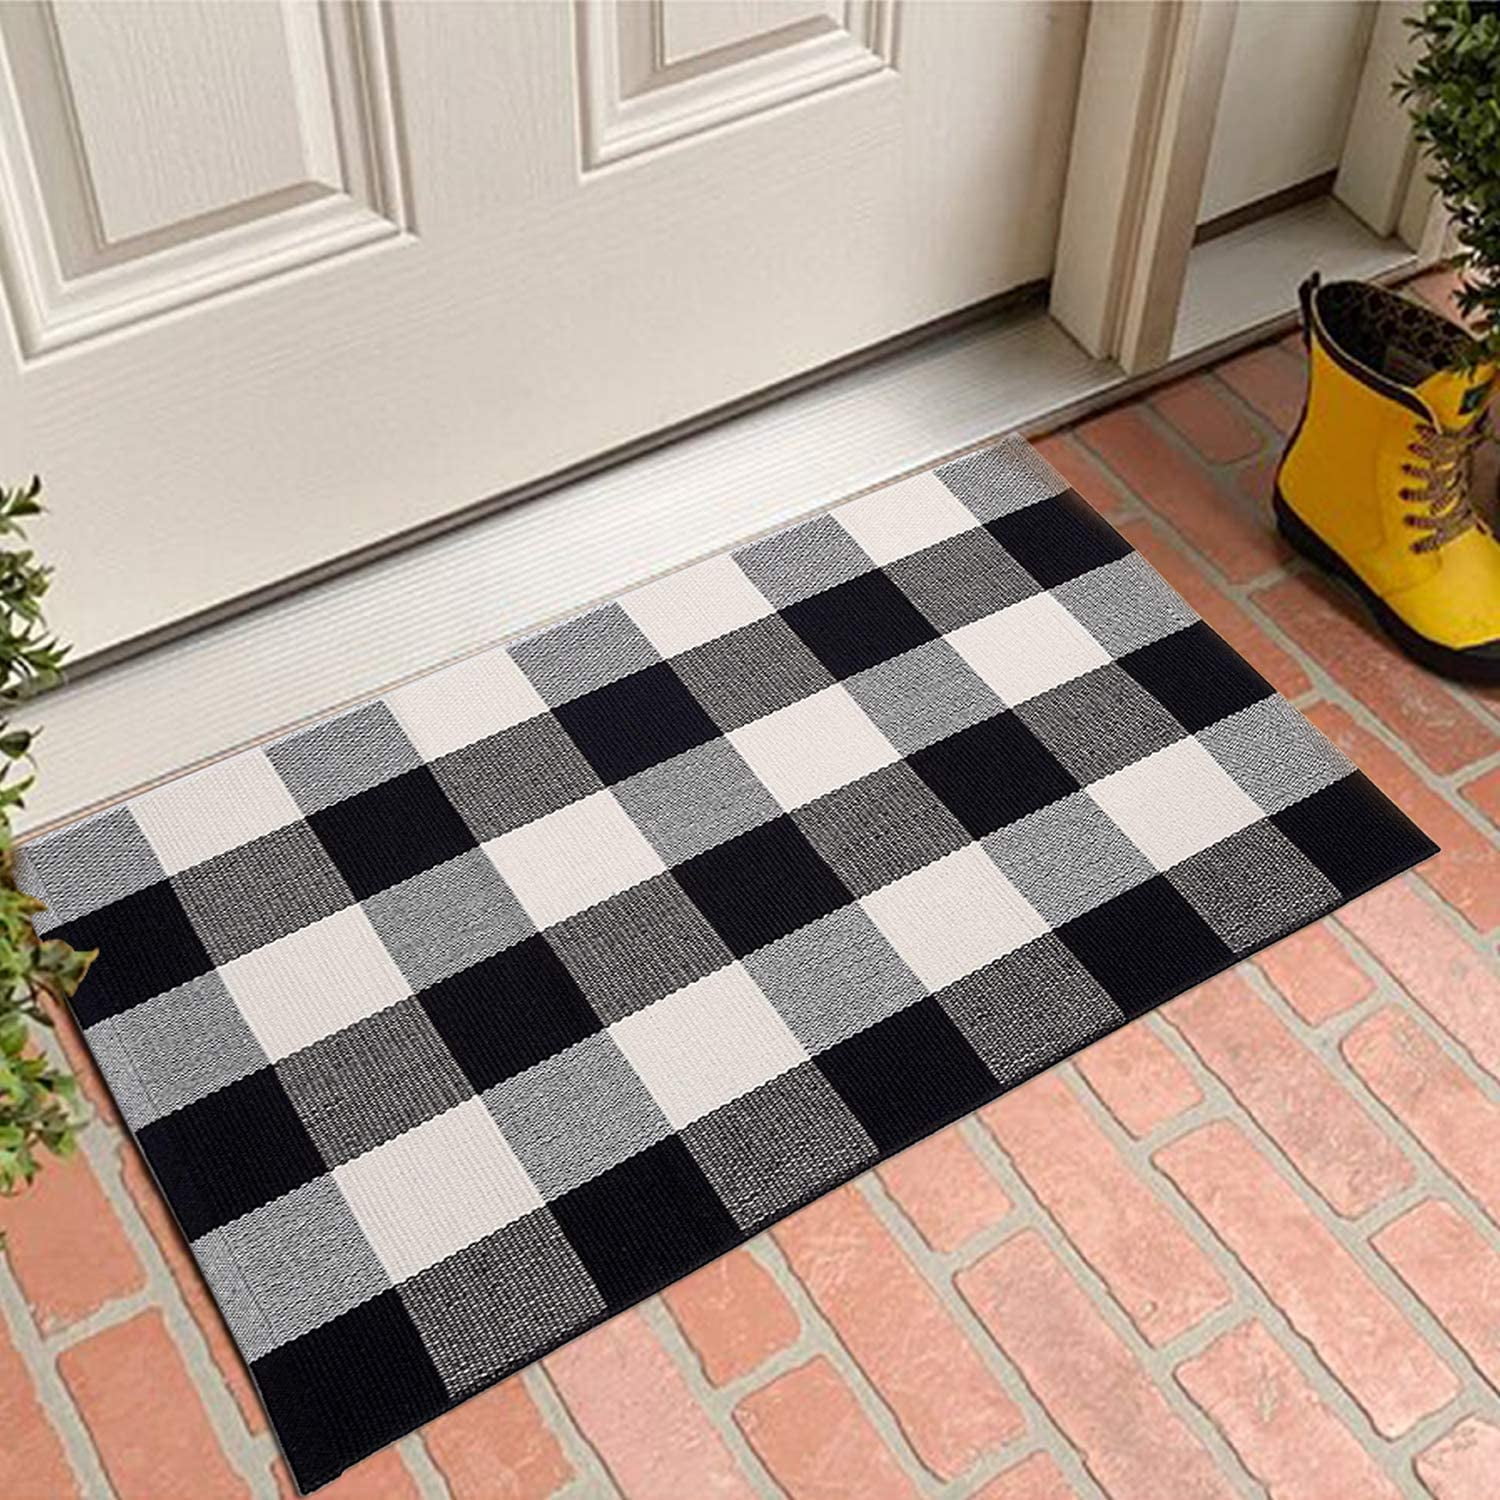 Layered Welcome Doormats Checkered Flannel Cotton Entry Way Layering Mats 24x36 Farmhouse Rugs for Kitchen/Bathroom/Front Porch/Decor Black and Red Check Door Mat Outdoor Buffalo Plaid Rug